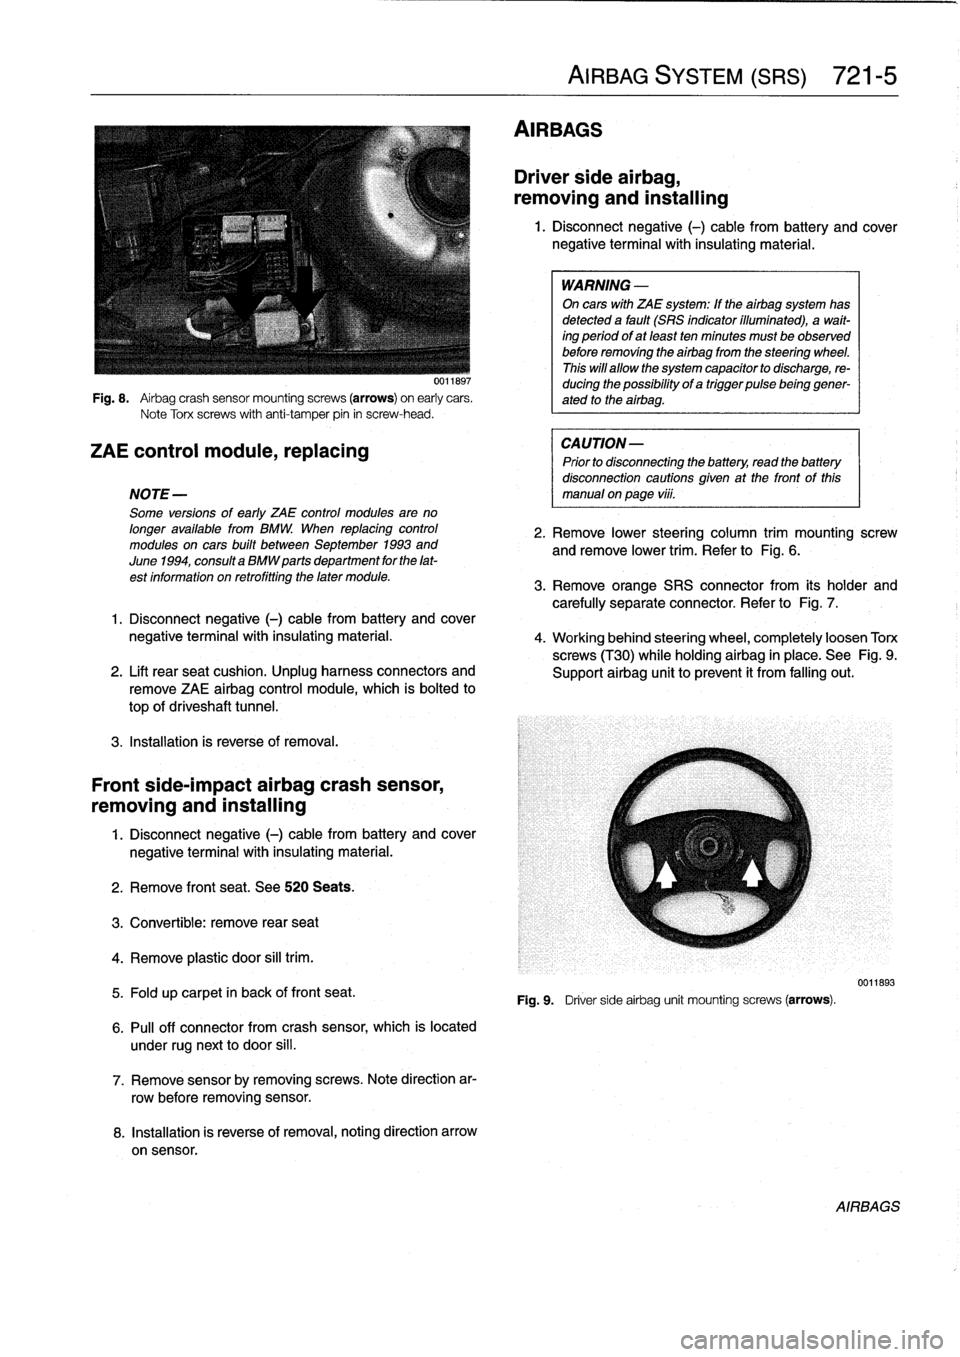 BMW 325i 1992 E36 Workshop Manual 
Fig
.
8
.

	

Airbag
crash
sensor
mountingscrews
(arrows)
on
early
cars
.
Note
Torx
screws
with
anti-tamper
pin
in
screw-head
.

ZAE
control
module,
replacing

NOTE-

Some
versions
of
early
ZAE
contr